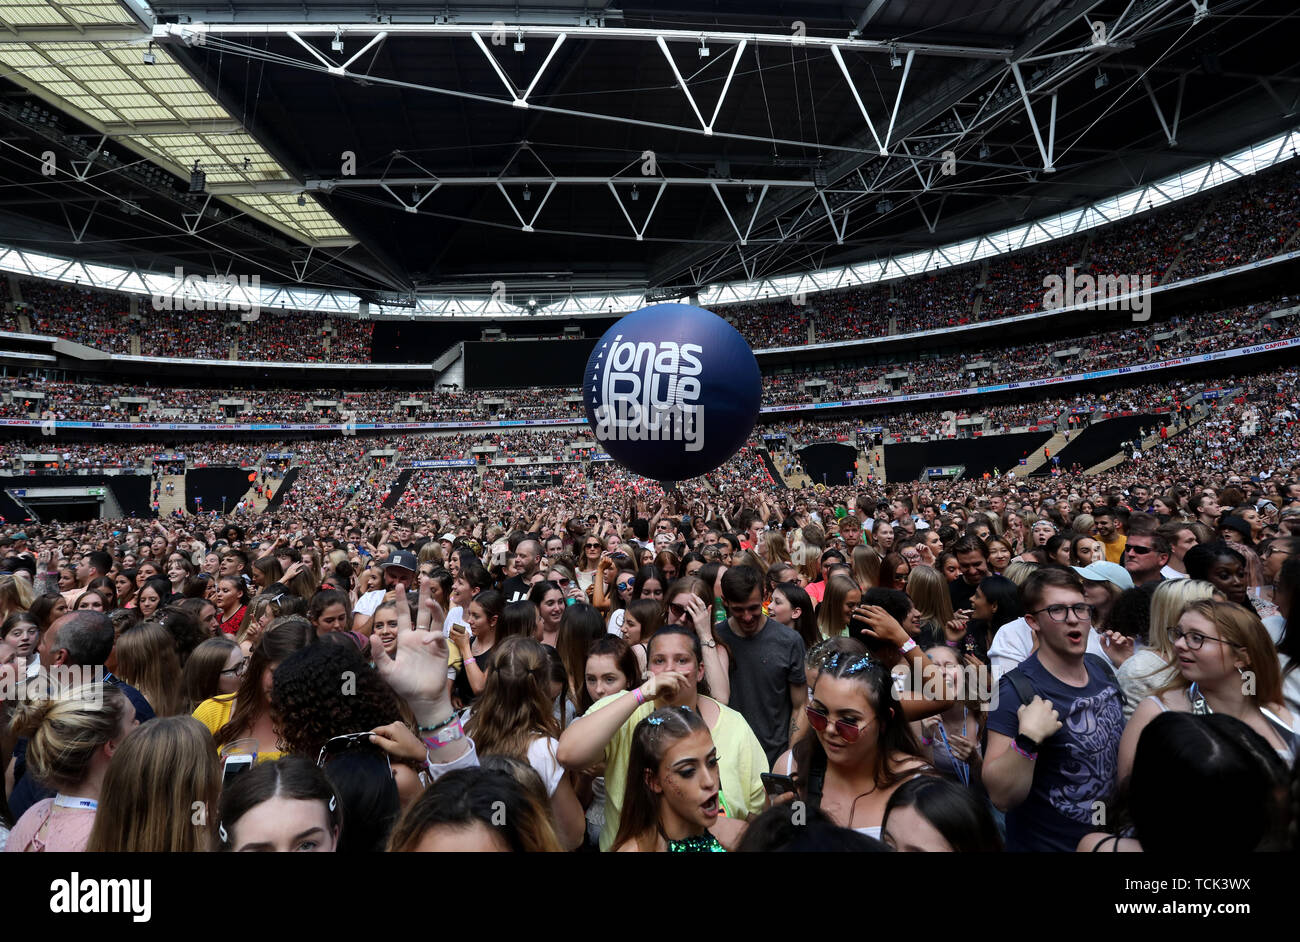 A Jonas Blue ball in the crowd during Capital's Summertime Ball. The world's biggest stars perform live for 80,000 Capital listeners at Wembley Stadium at the UK's biggest summer party. PRESS ASSOCIATION PHOTO. Picture date: Saturday June 8, 2019. Photo credit should read: Isabel Infantes/PA Wire Stock Photo